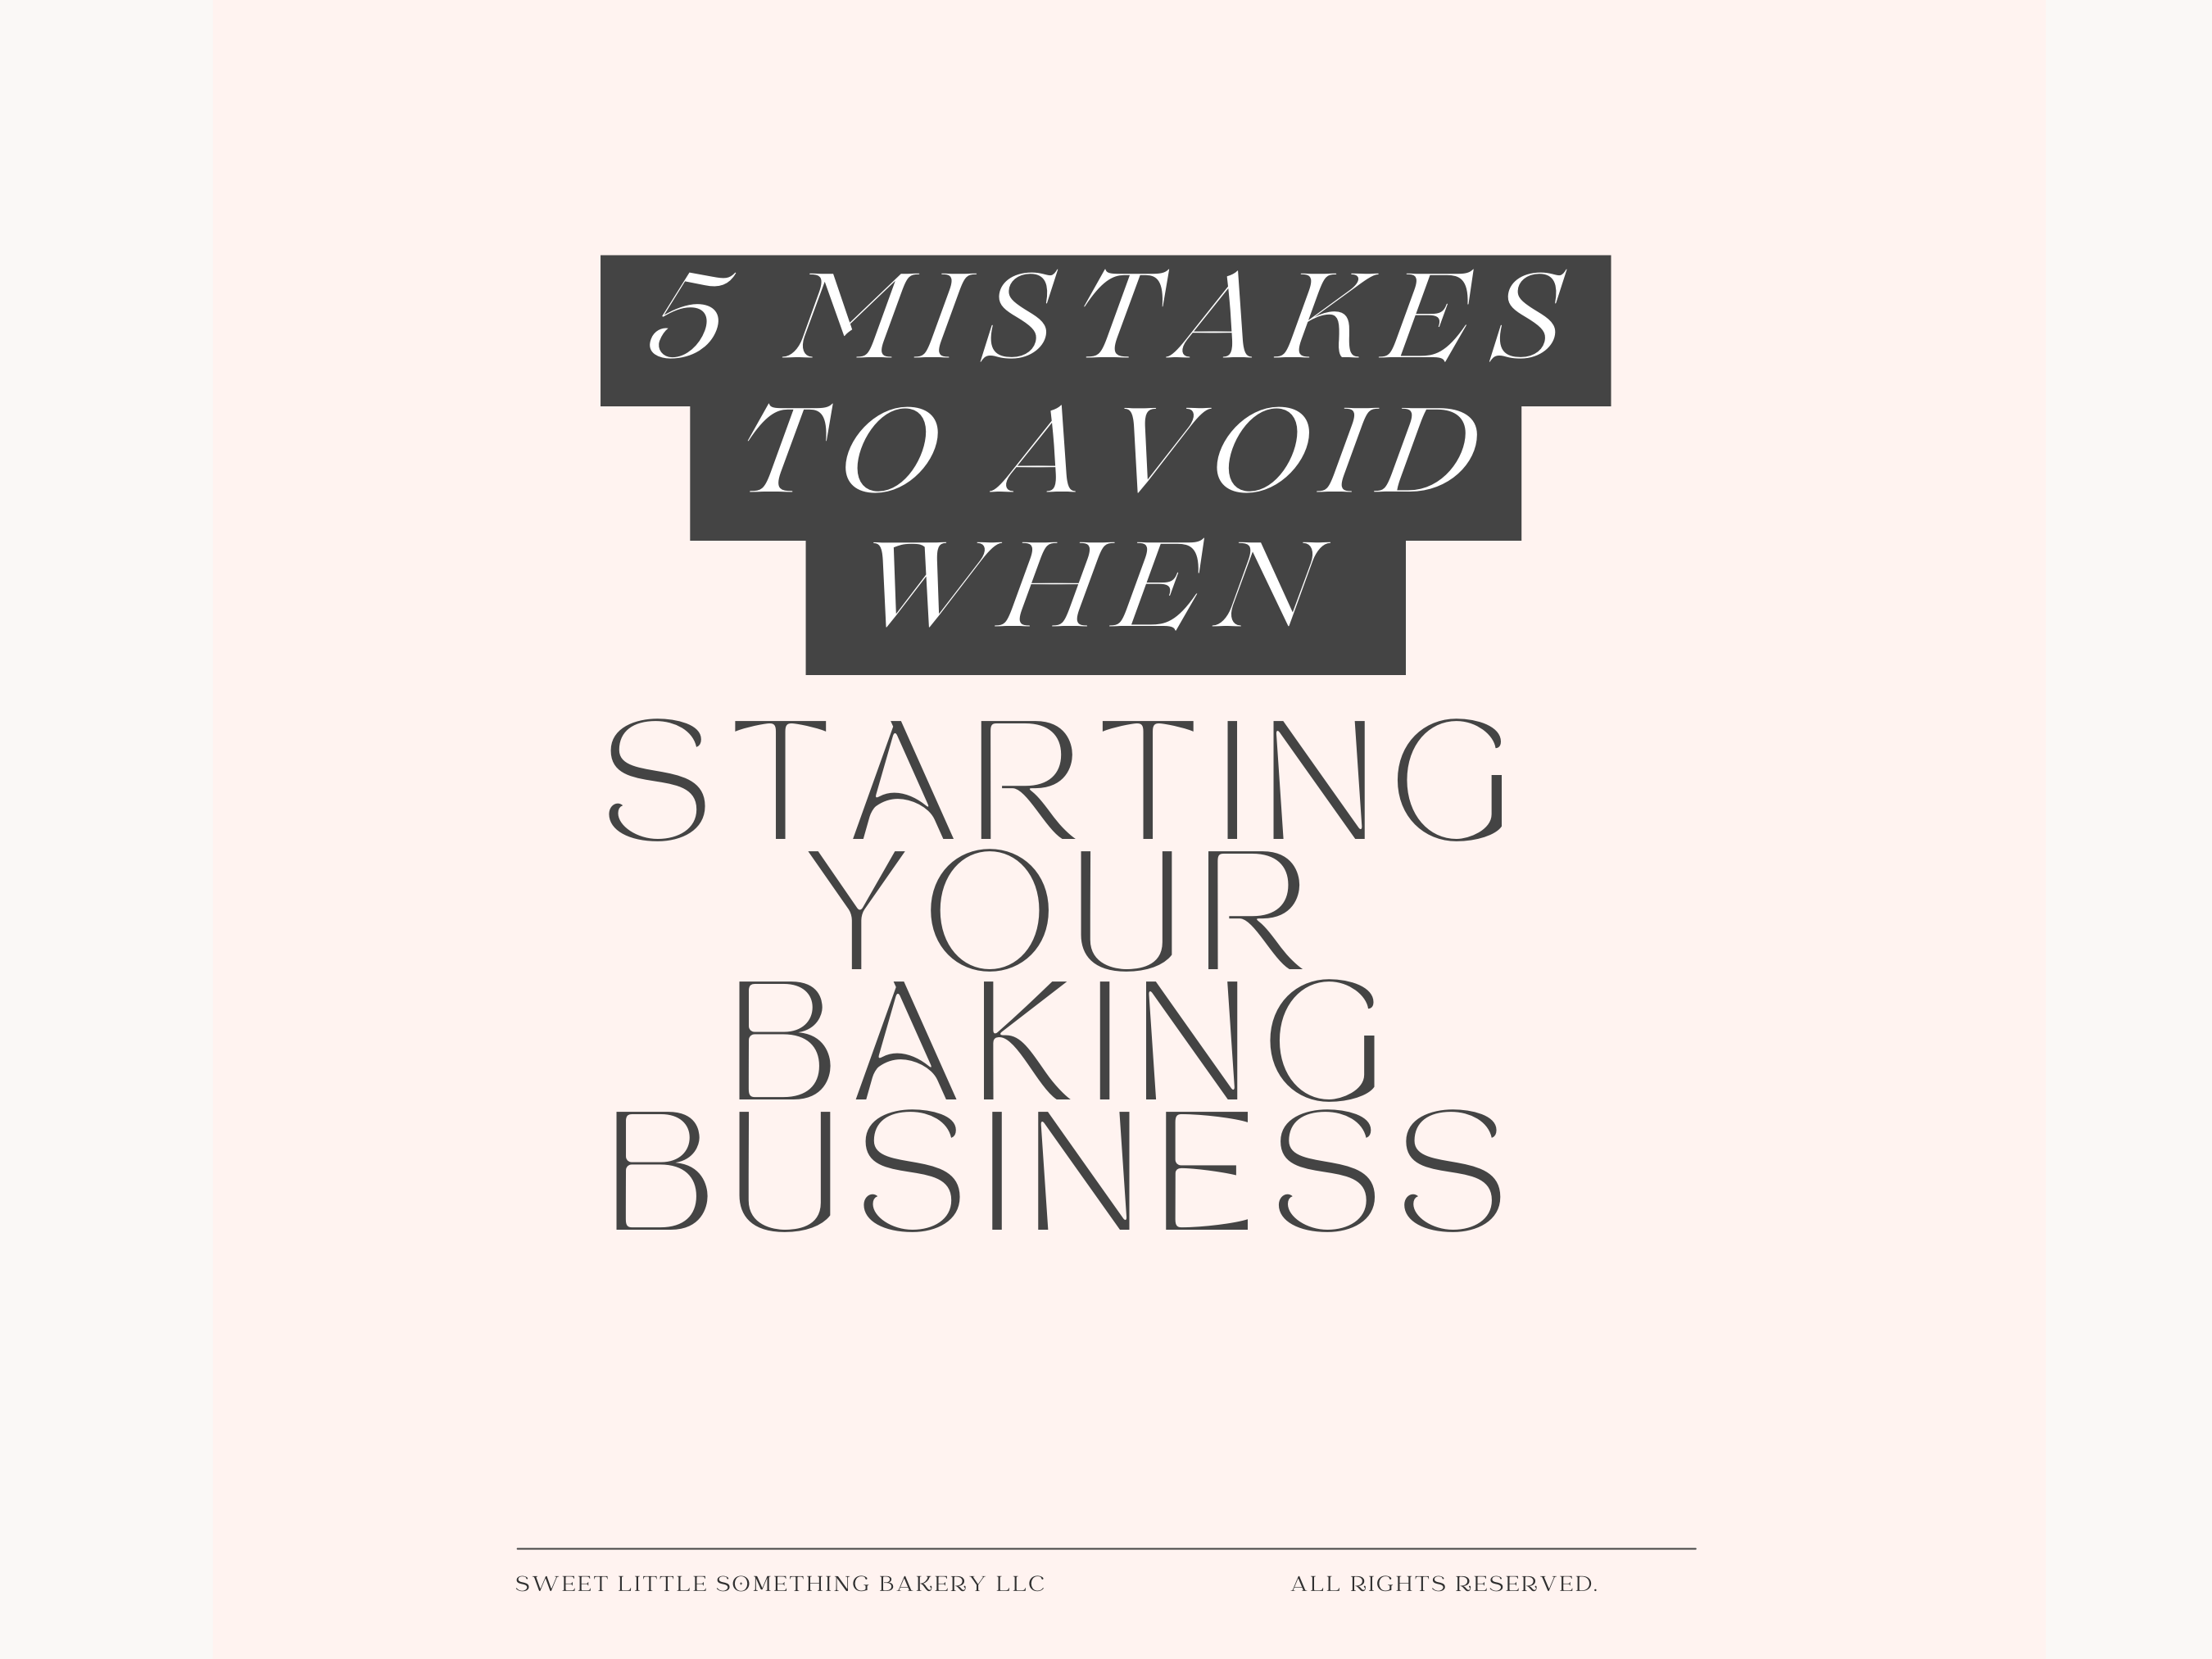 Starting a Home Bakery: 5 Mistakes to Avoid!